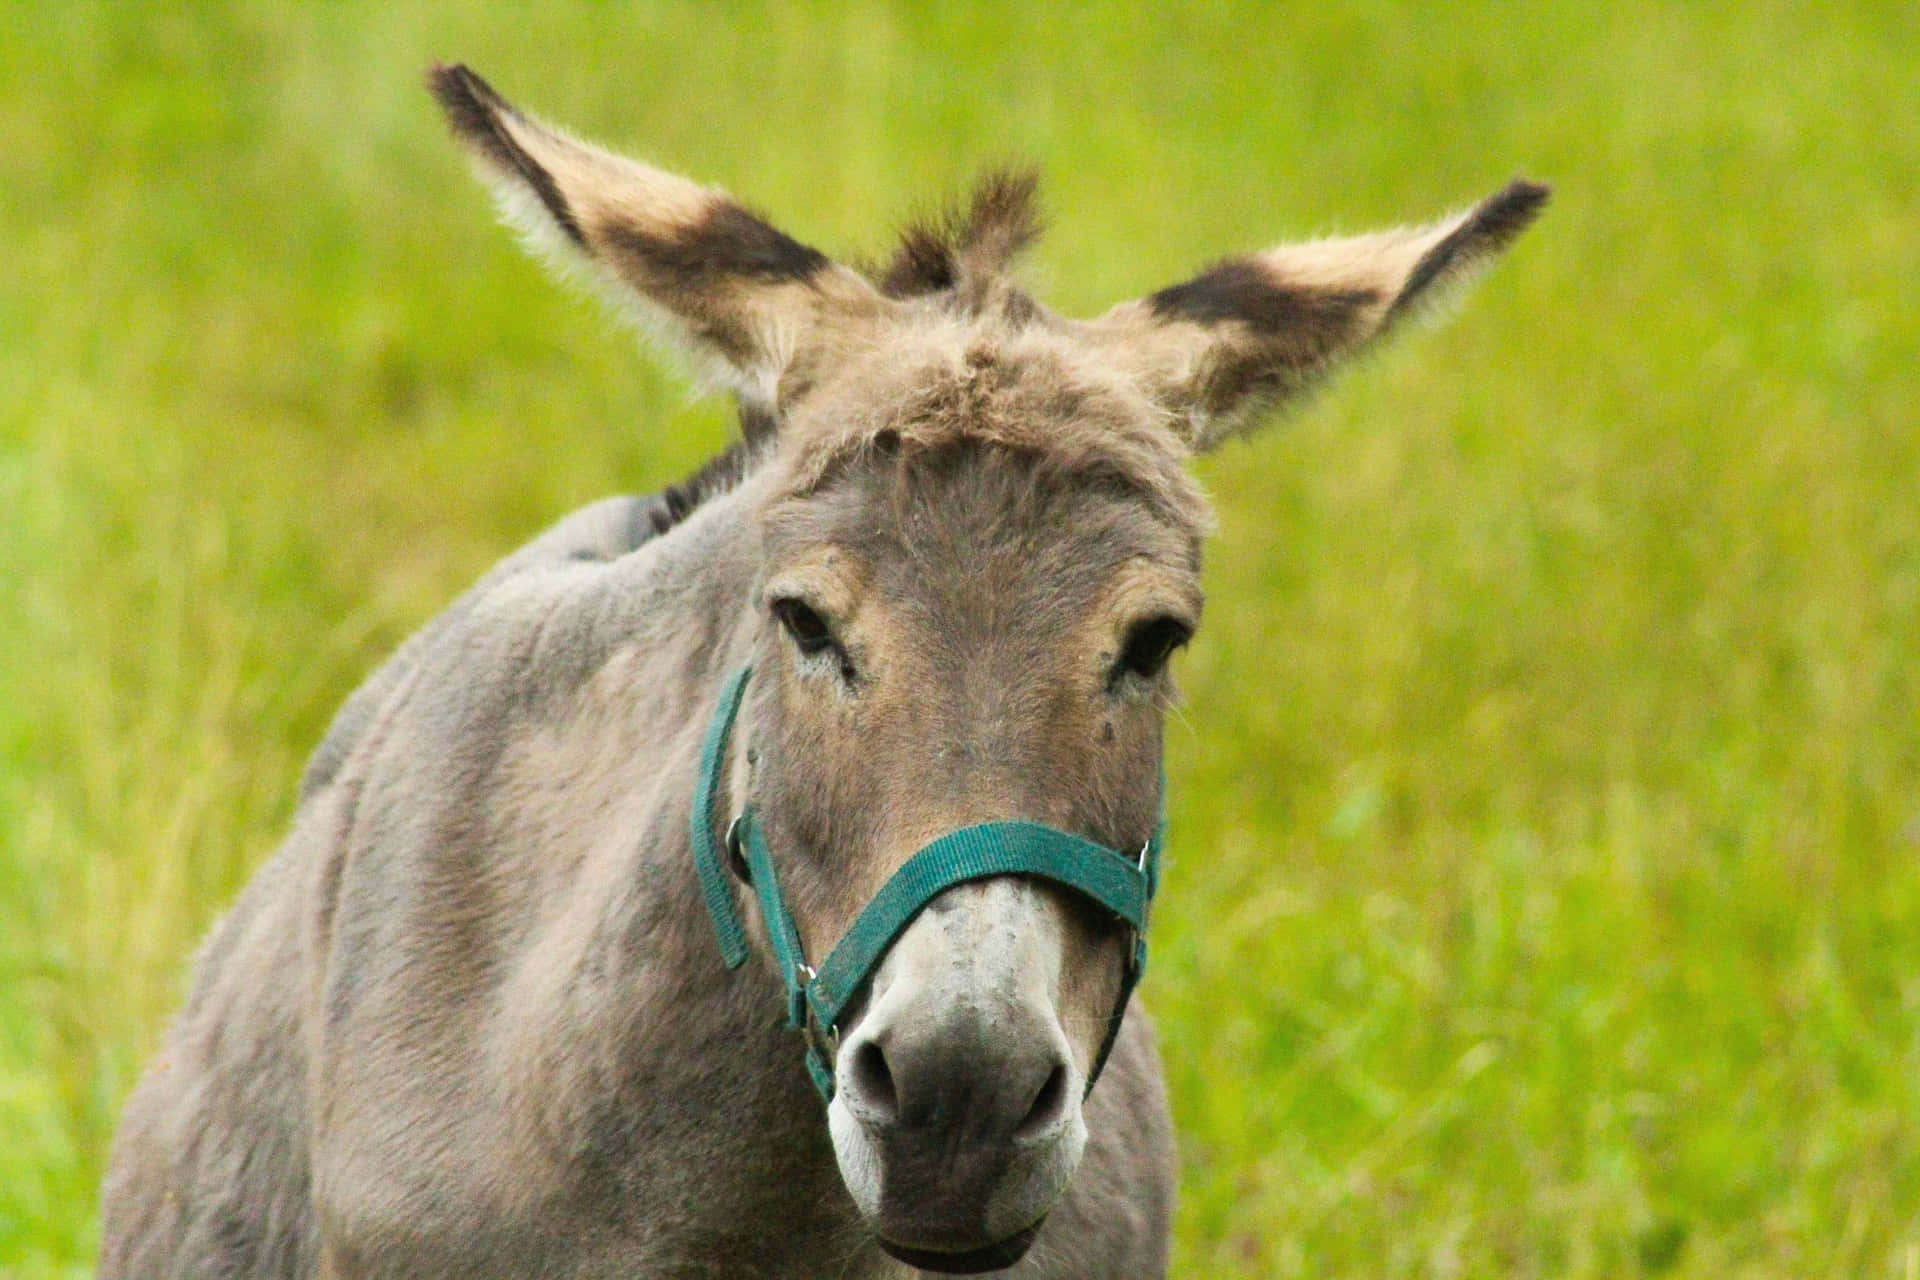 A content donkey enjoying the great outdoors